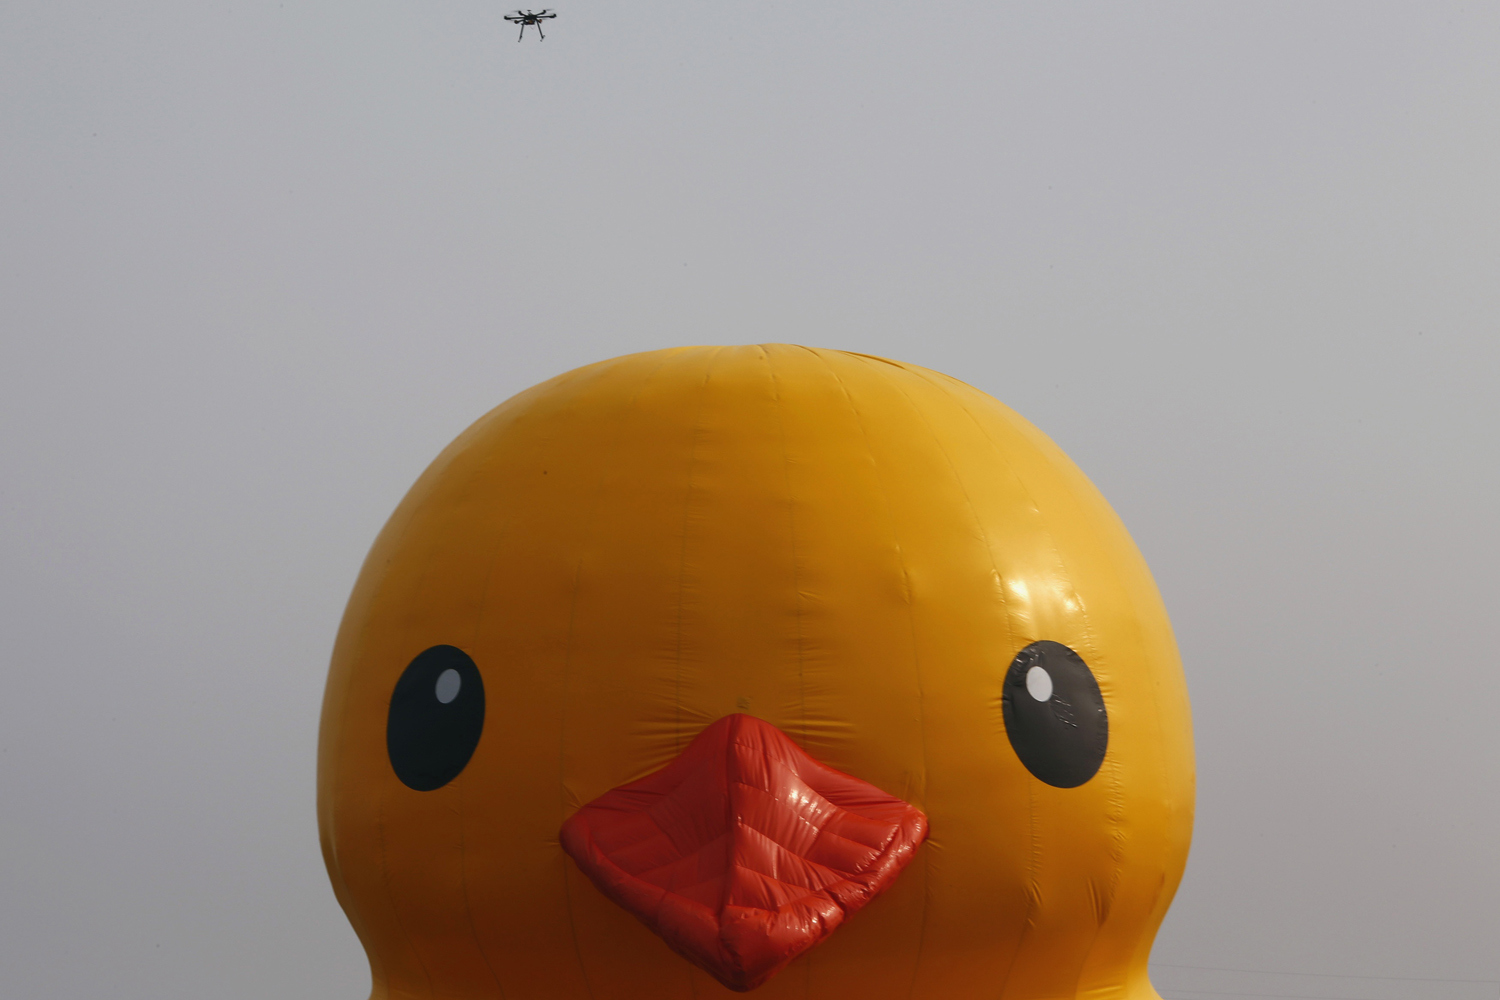 A remote-controlled helicopter camera flies above an inflated Rubber Duck by Dutch conceptual artist Florentijn Hofman floating on a lake at the 9th China International Garden Expo in Beijing